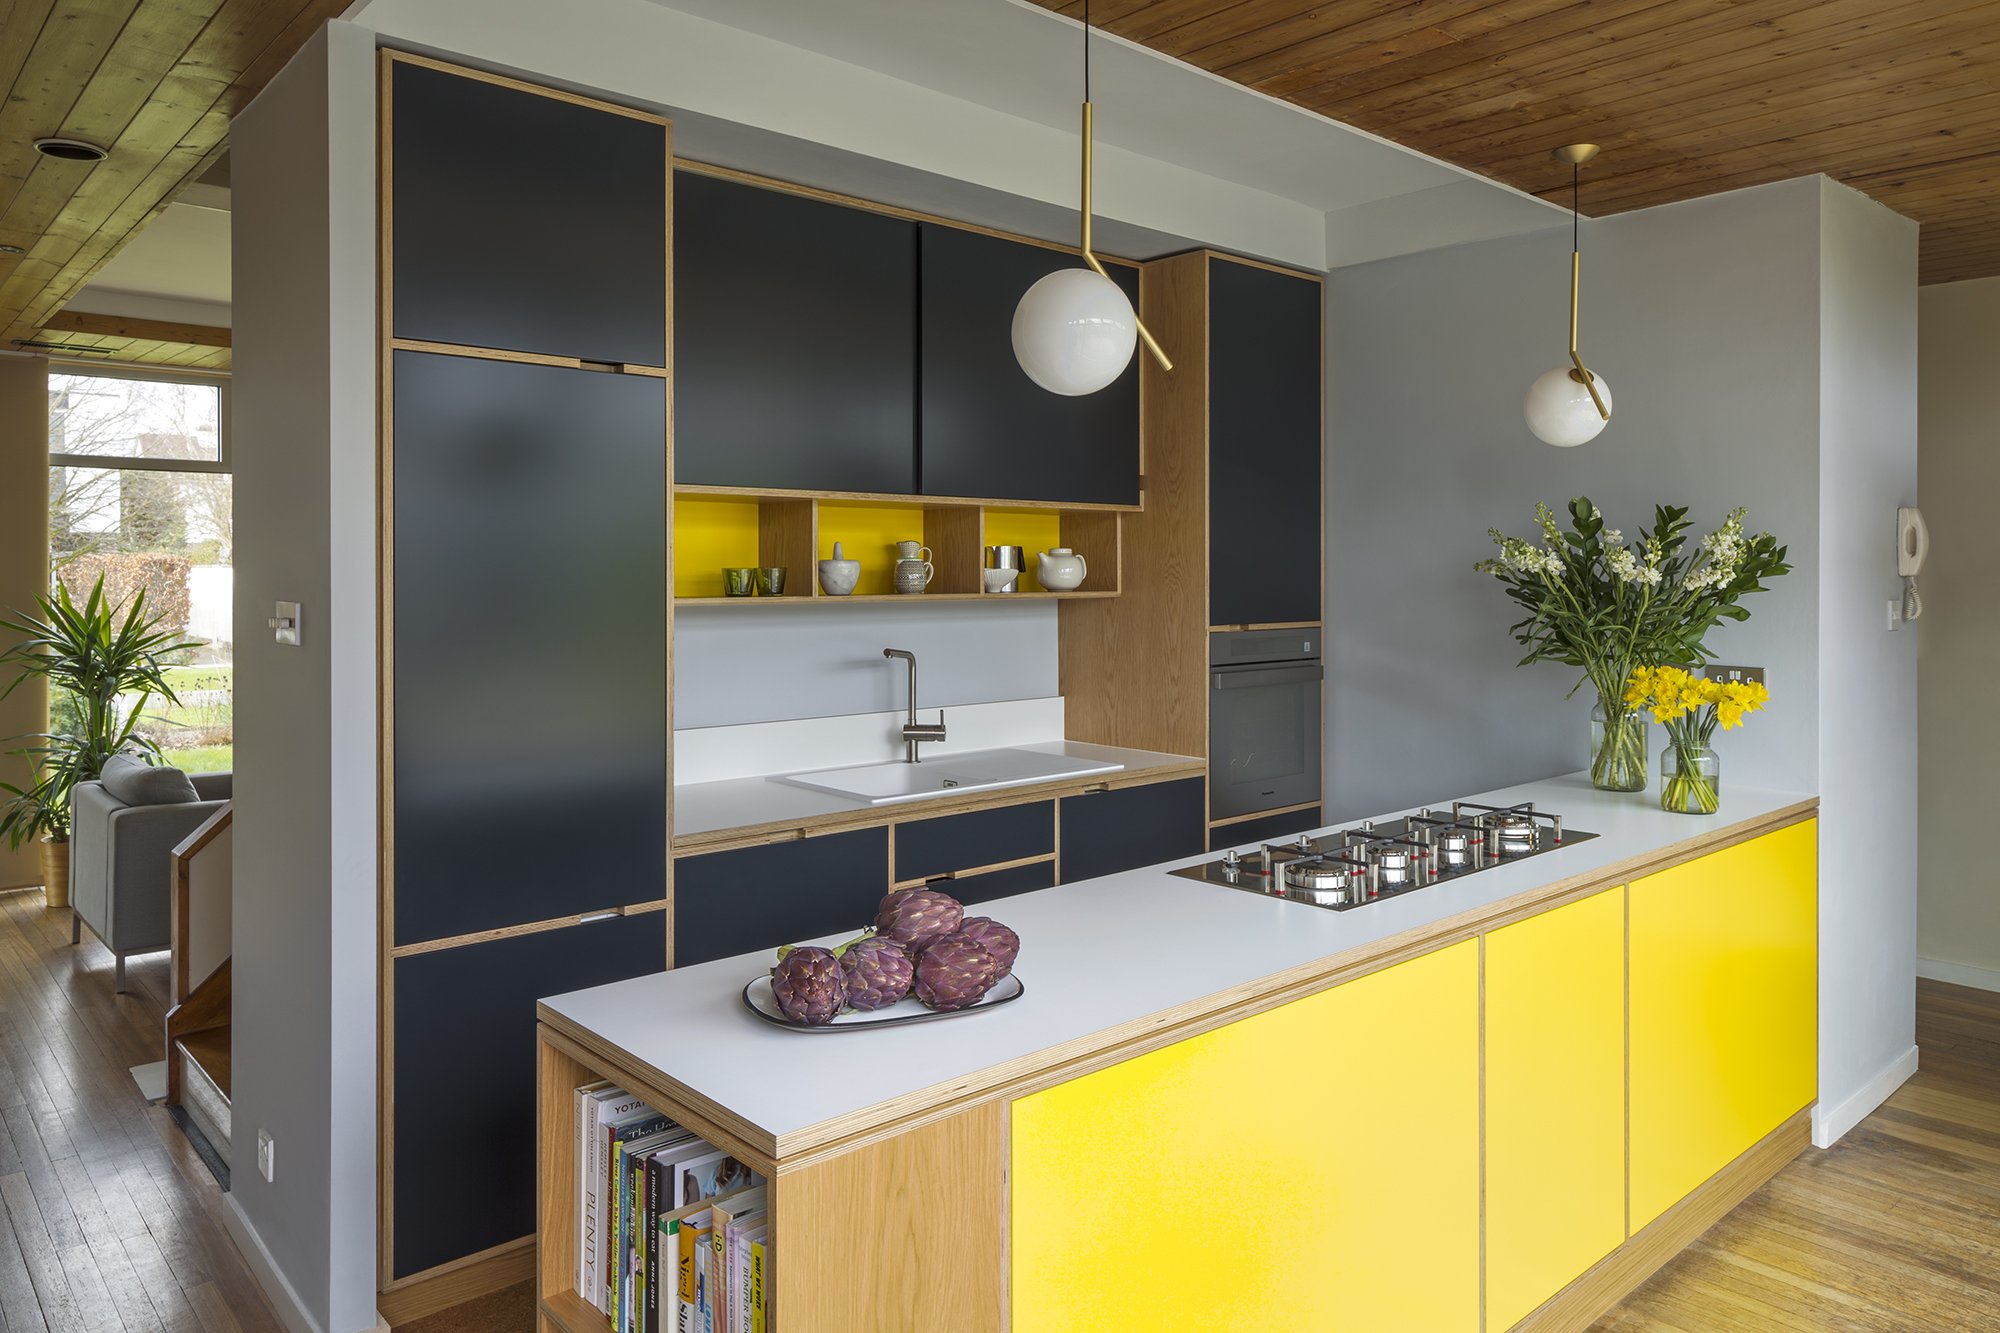 Shepperton+Bespoke+Plywood+Kitchen+In+Birch+With+Wooden+Flooring+And+Canary+Yellow+Ply+Cabinetry